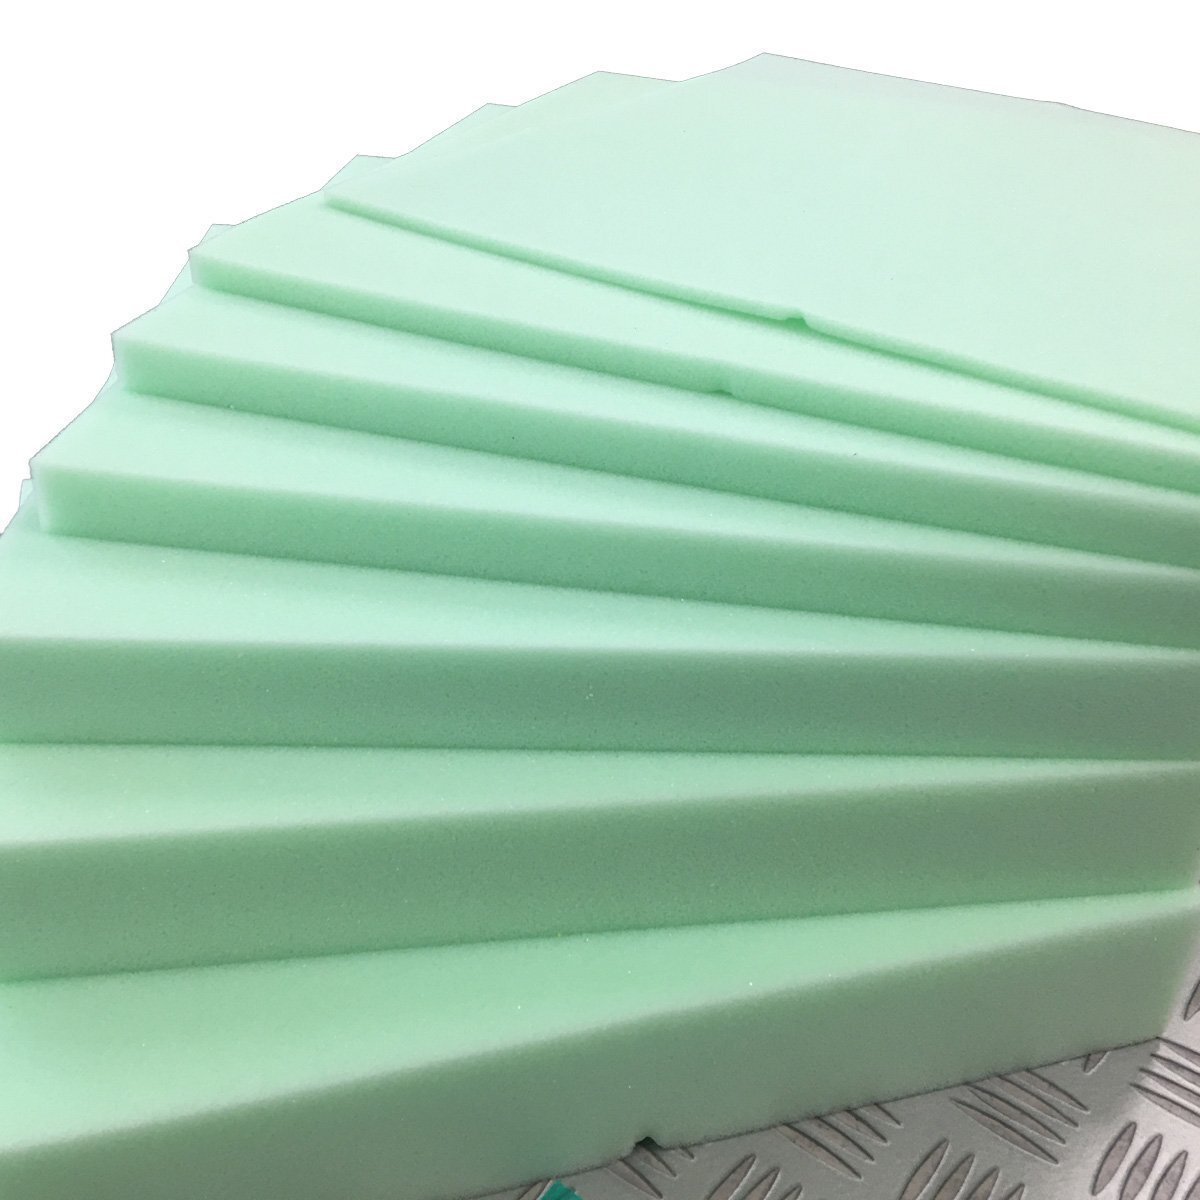  urethane foam [GL-10. thickness ] hardness little hard width 1200x length 2000mm sponge / mat / seat repair / sleeping area in the vehicle for bed / camper 